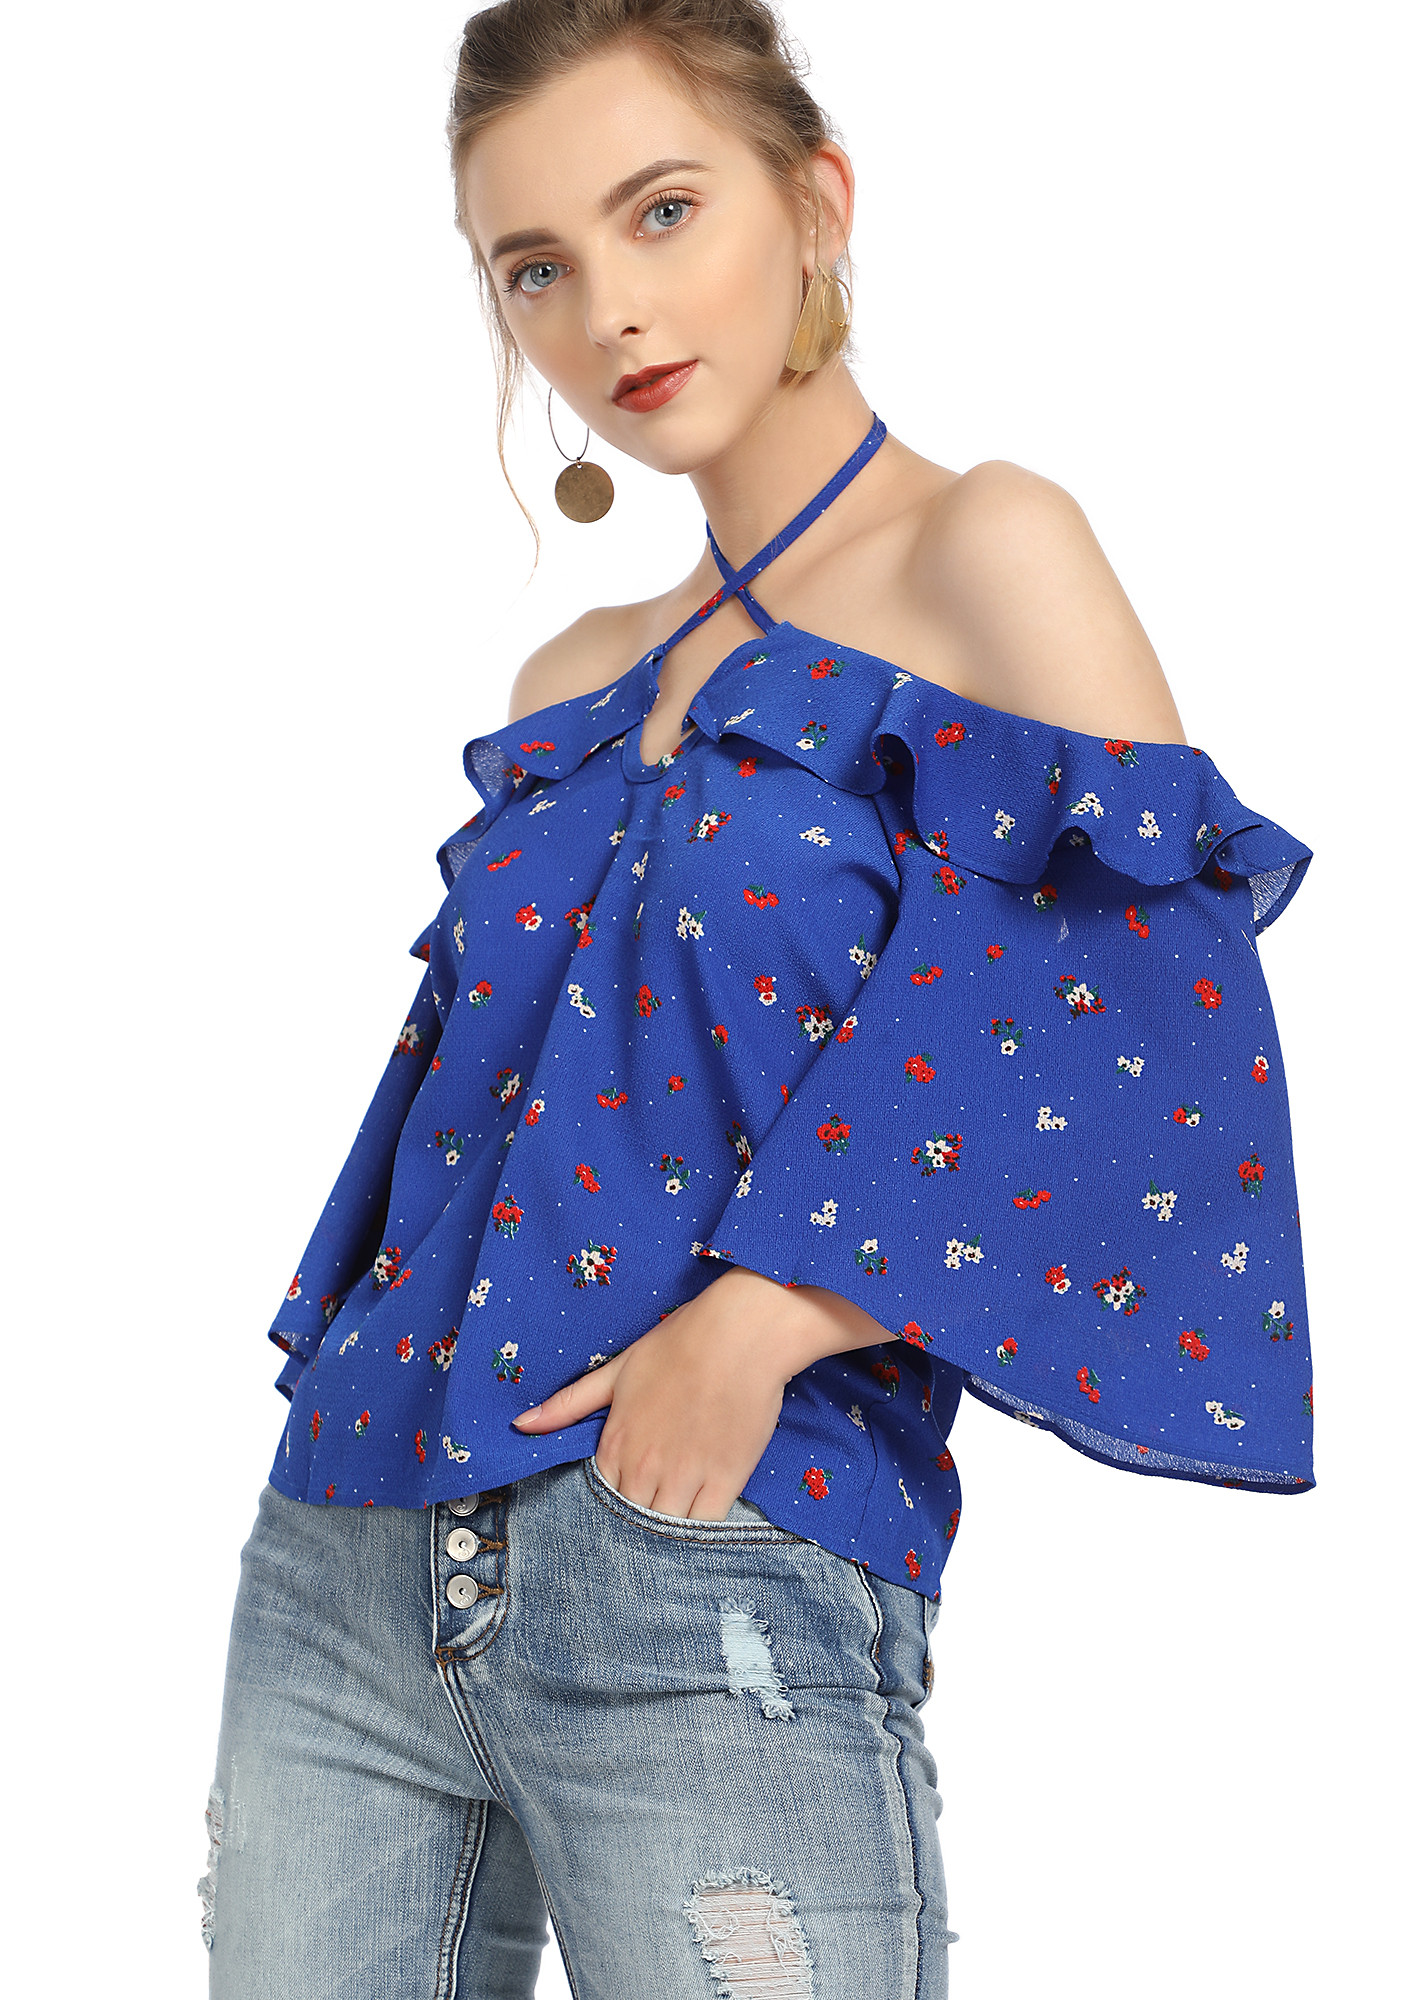 BOLD MOVES BLUE TOP